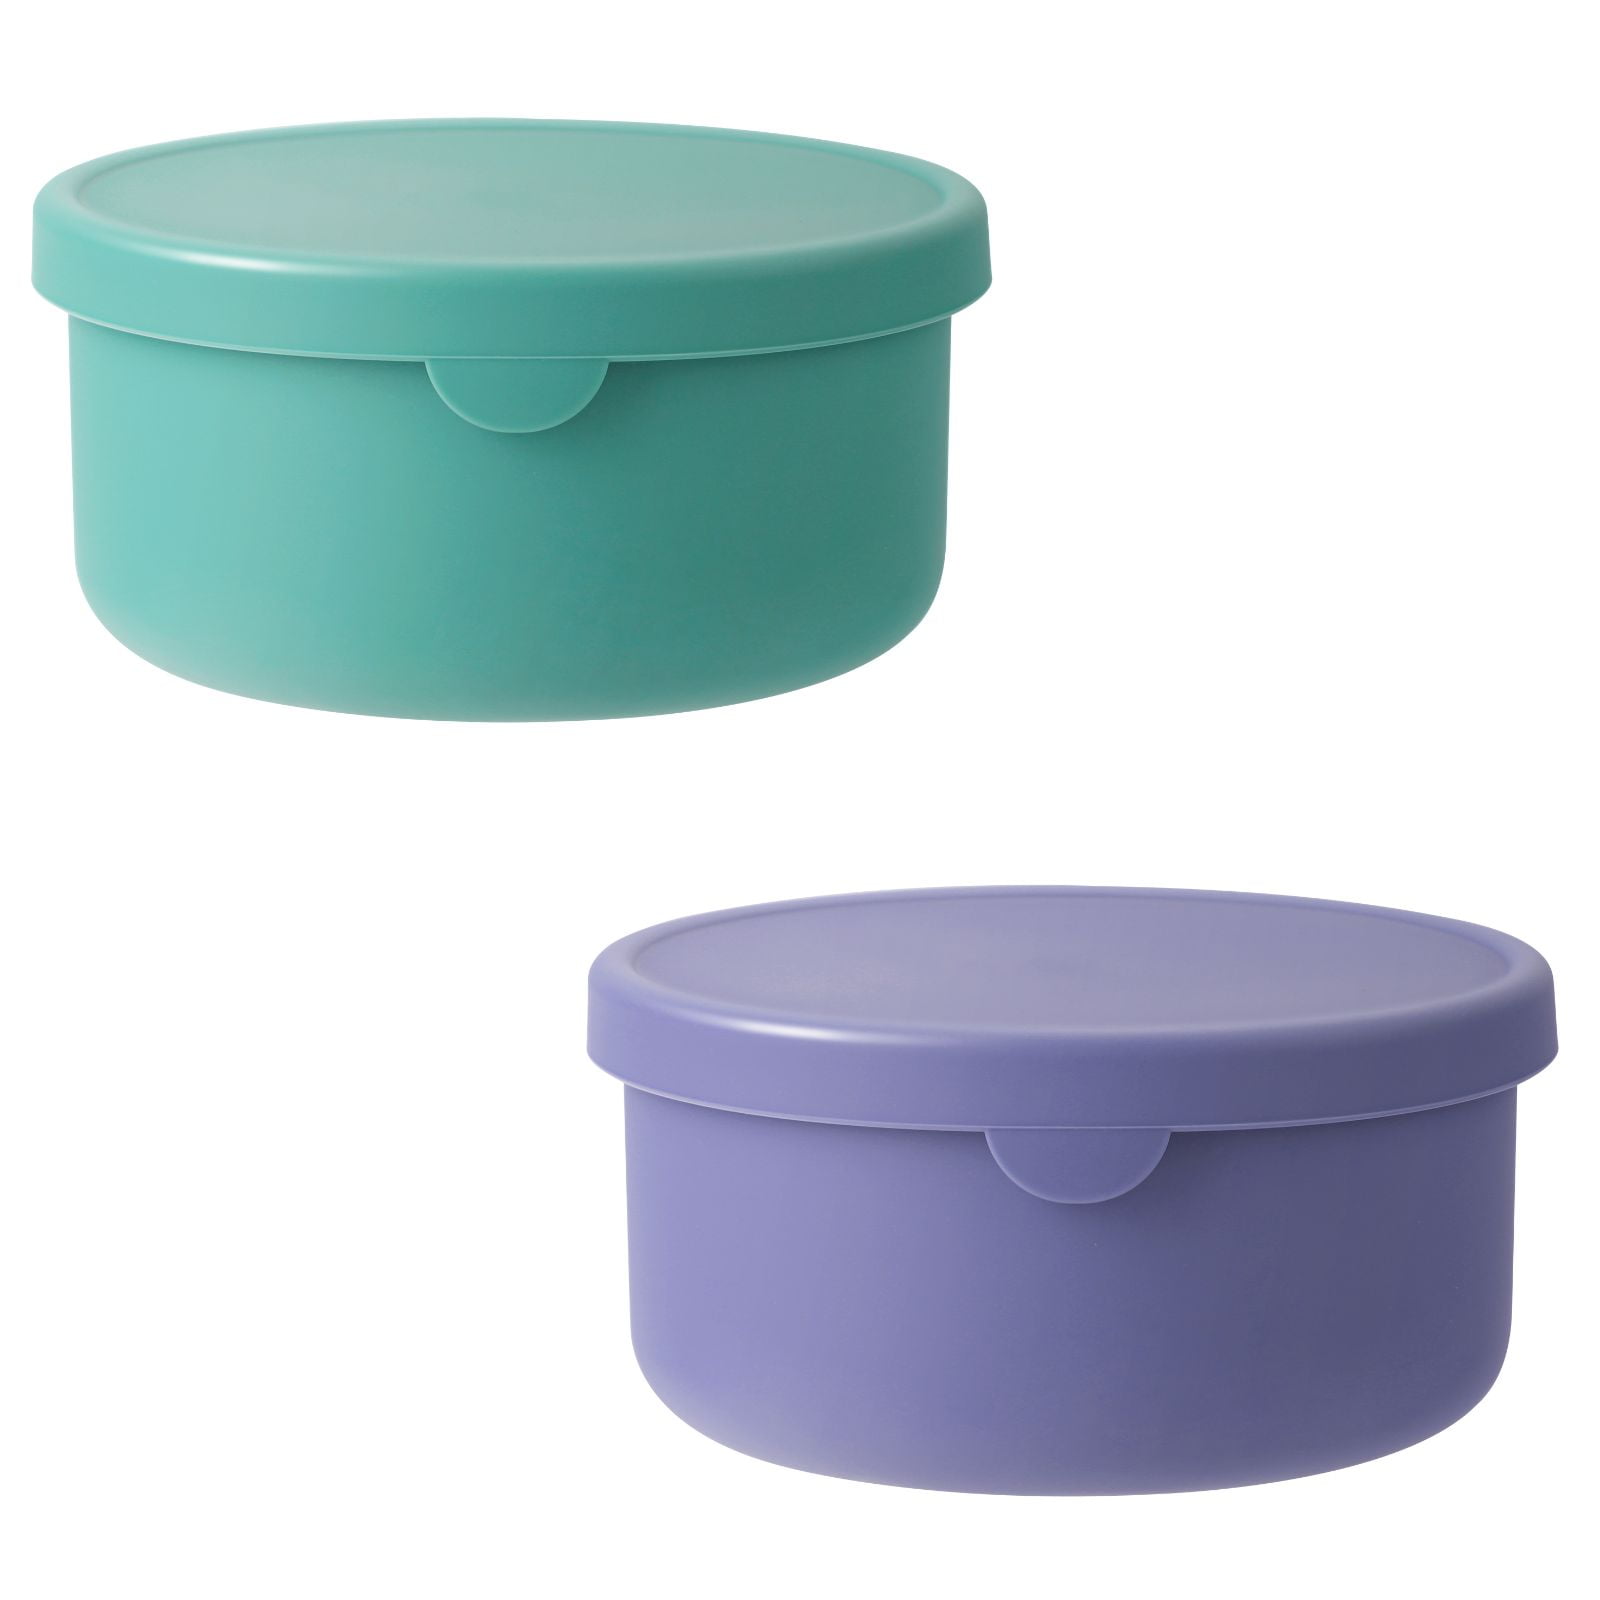 2pcs Silicone Bowls with Lids Set, Reusable Food Container with Airtight  Lids, BPA Free Microwave Safe Silicone Bowls for Travel Camping Fridge Food